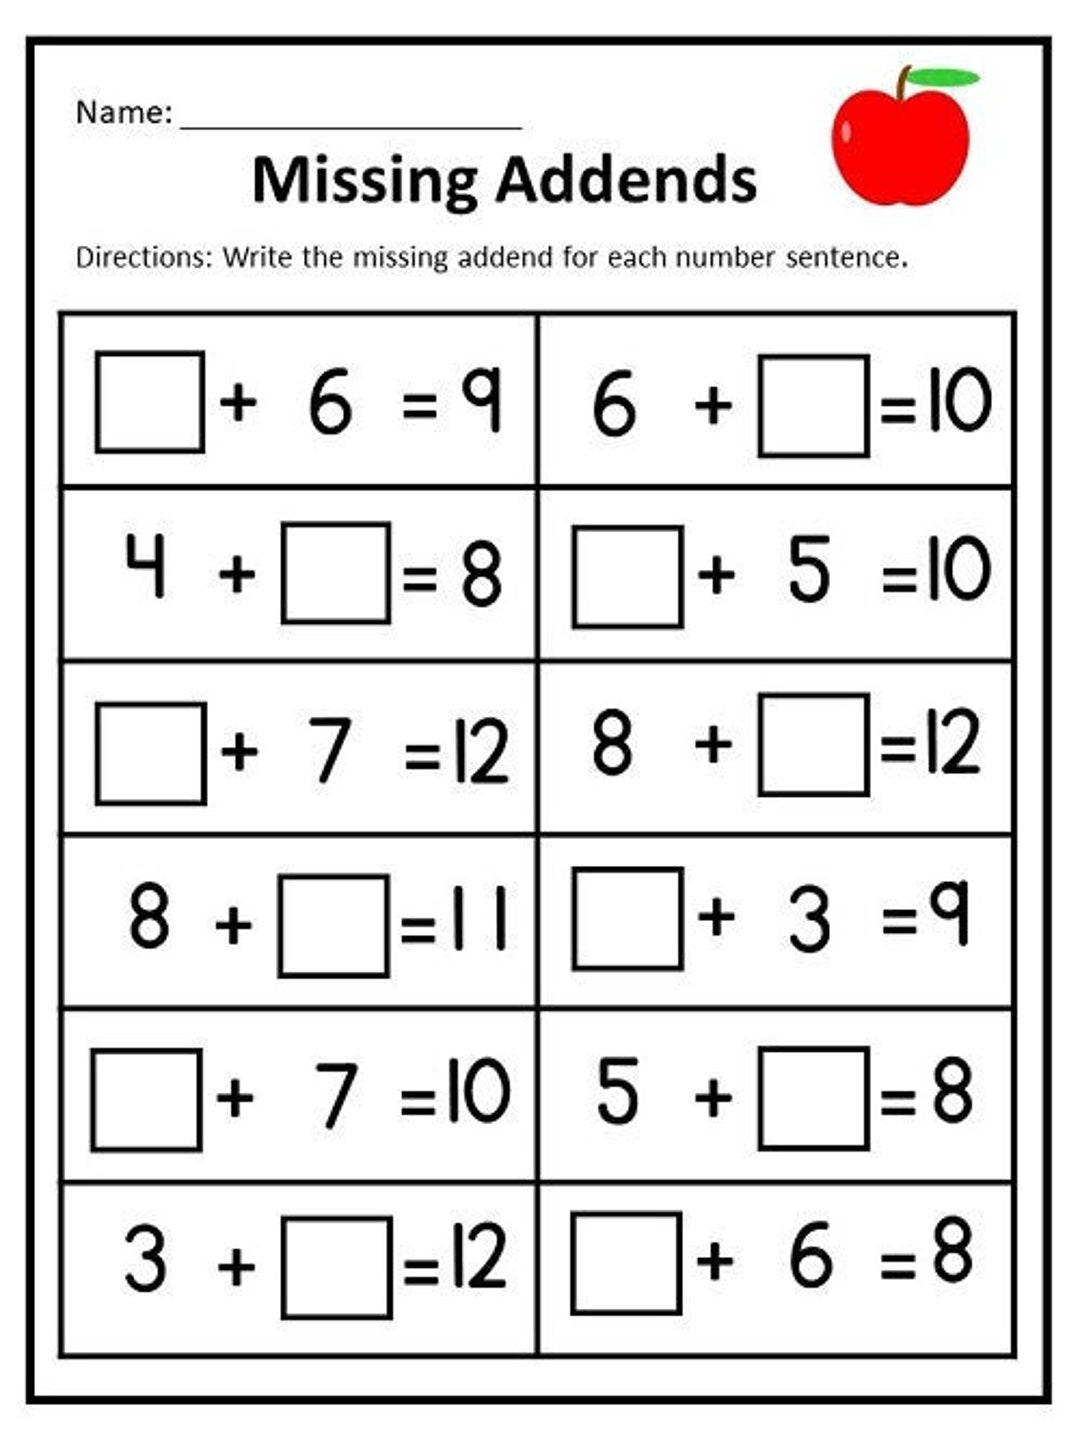 10 Printable Missing Addends Worksheets Numbers 1 20 For Etsy